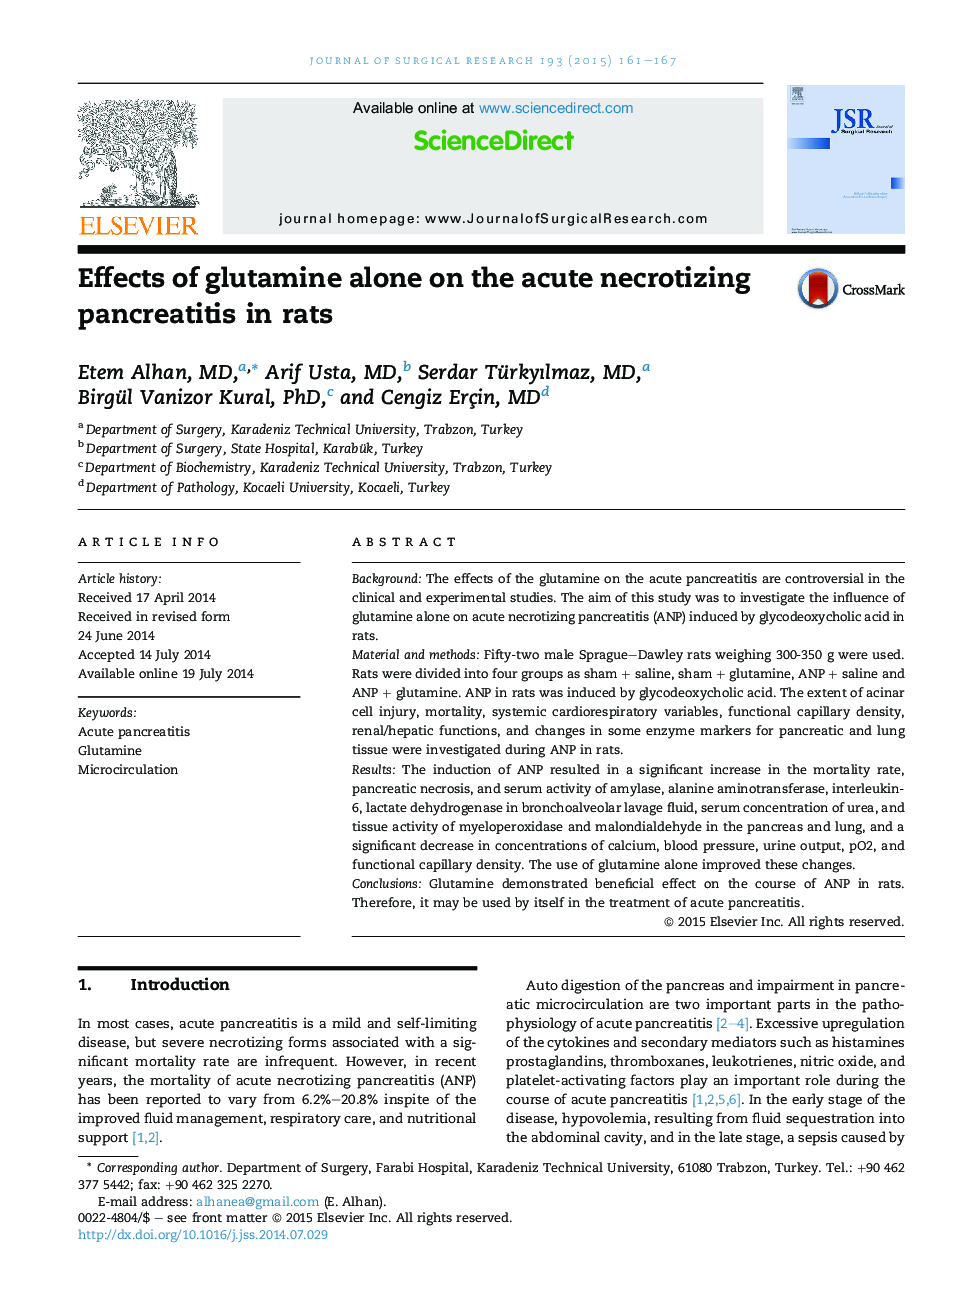 GastrointestinalEffects of glutamine alone on the acute necrotizing pancreatitis in rats